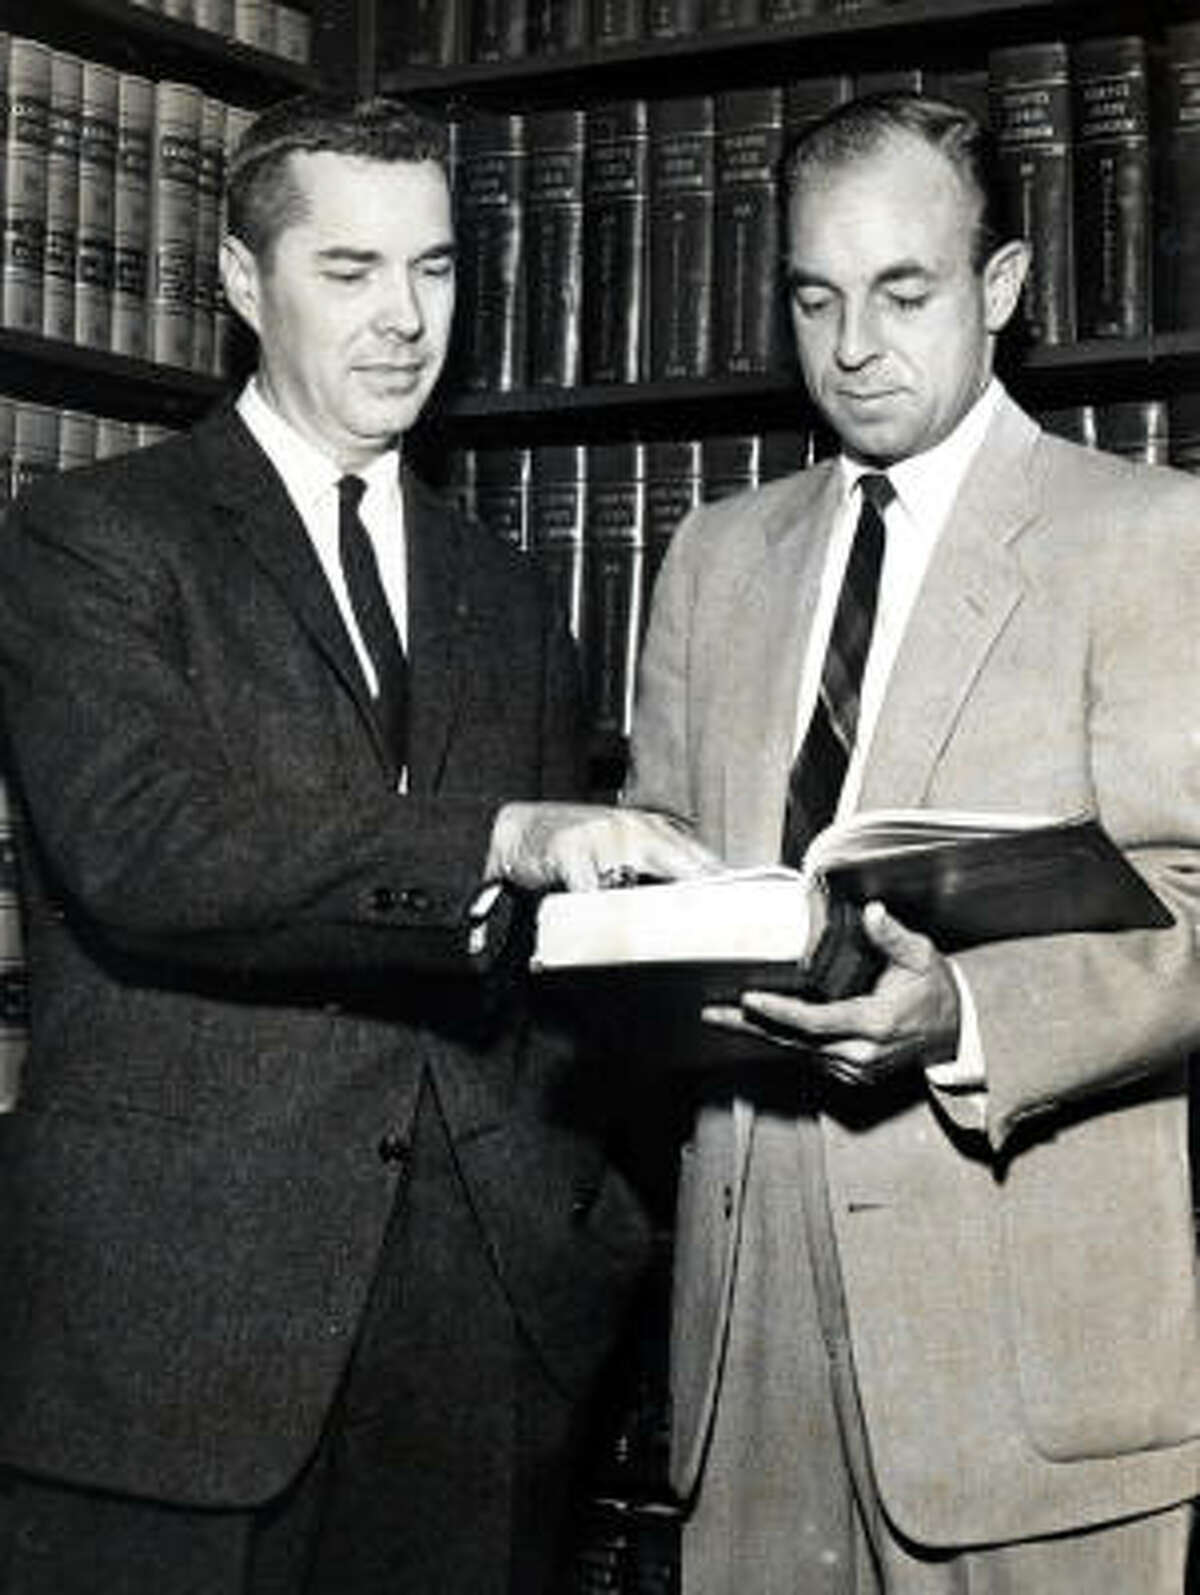 Then-Harris County District Attorney-elect Frank Briscoe, left, with aide Wallace C. "Pete" Moore in 1960.